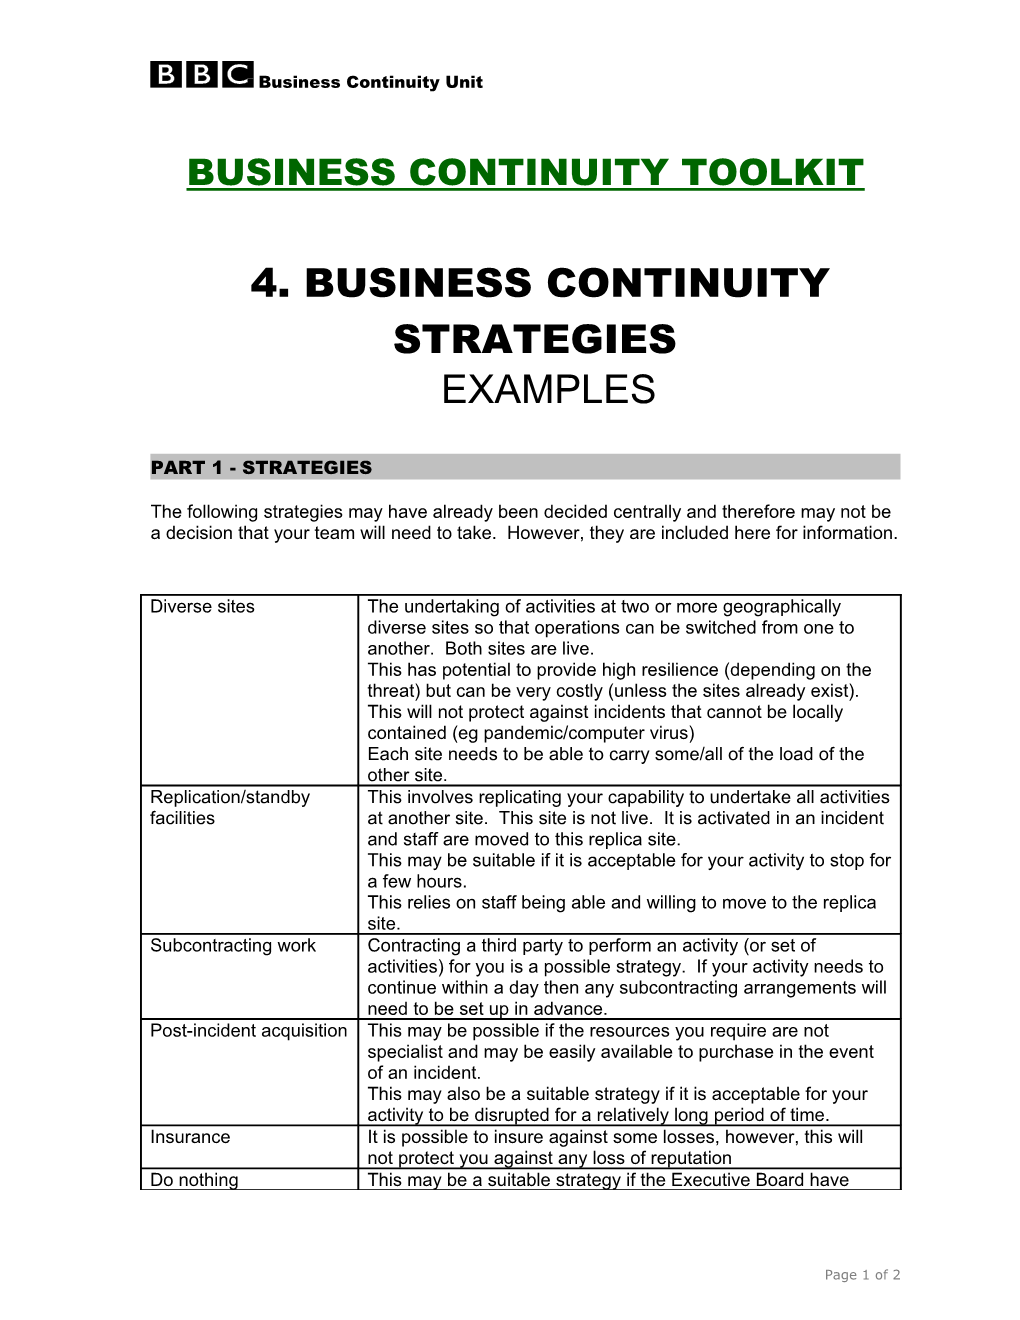 Typical Business Continuity Plan Content